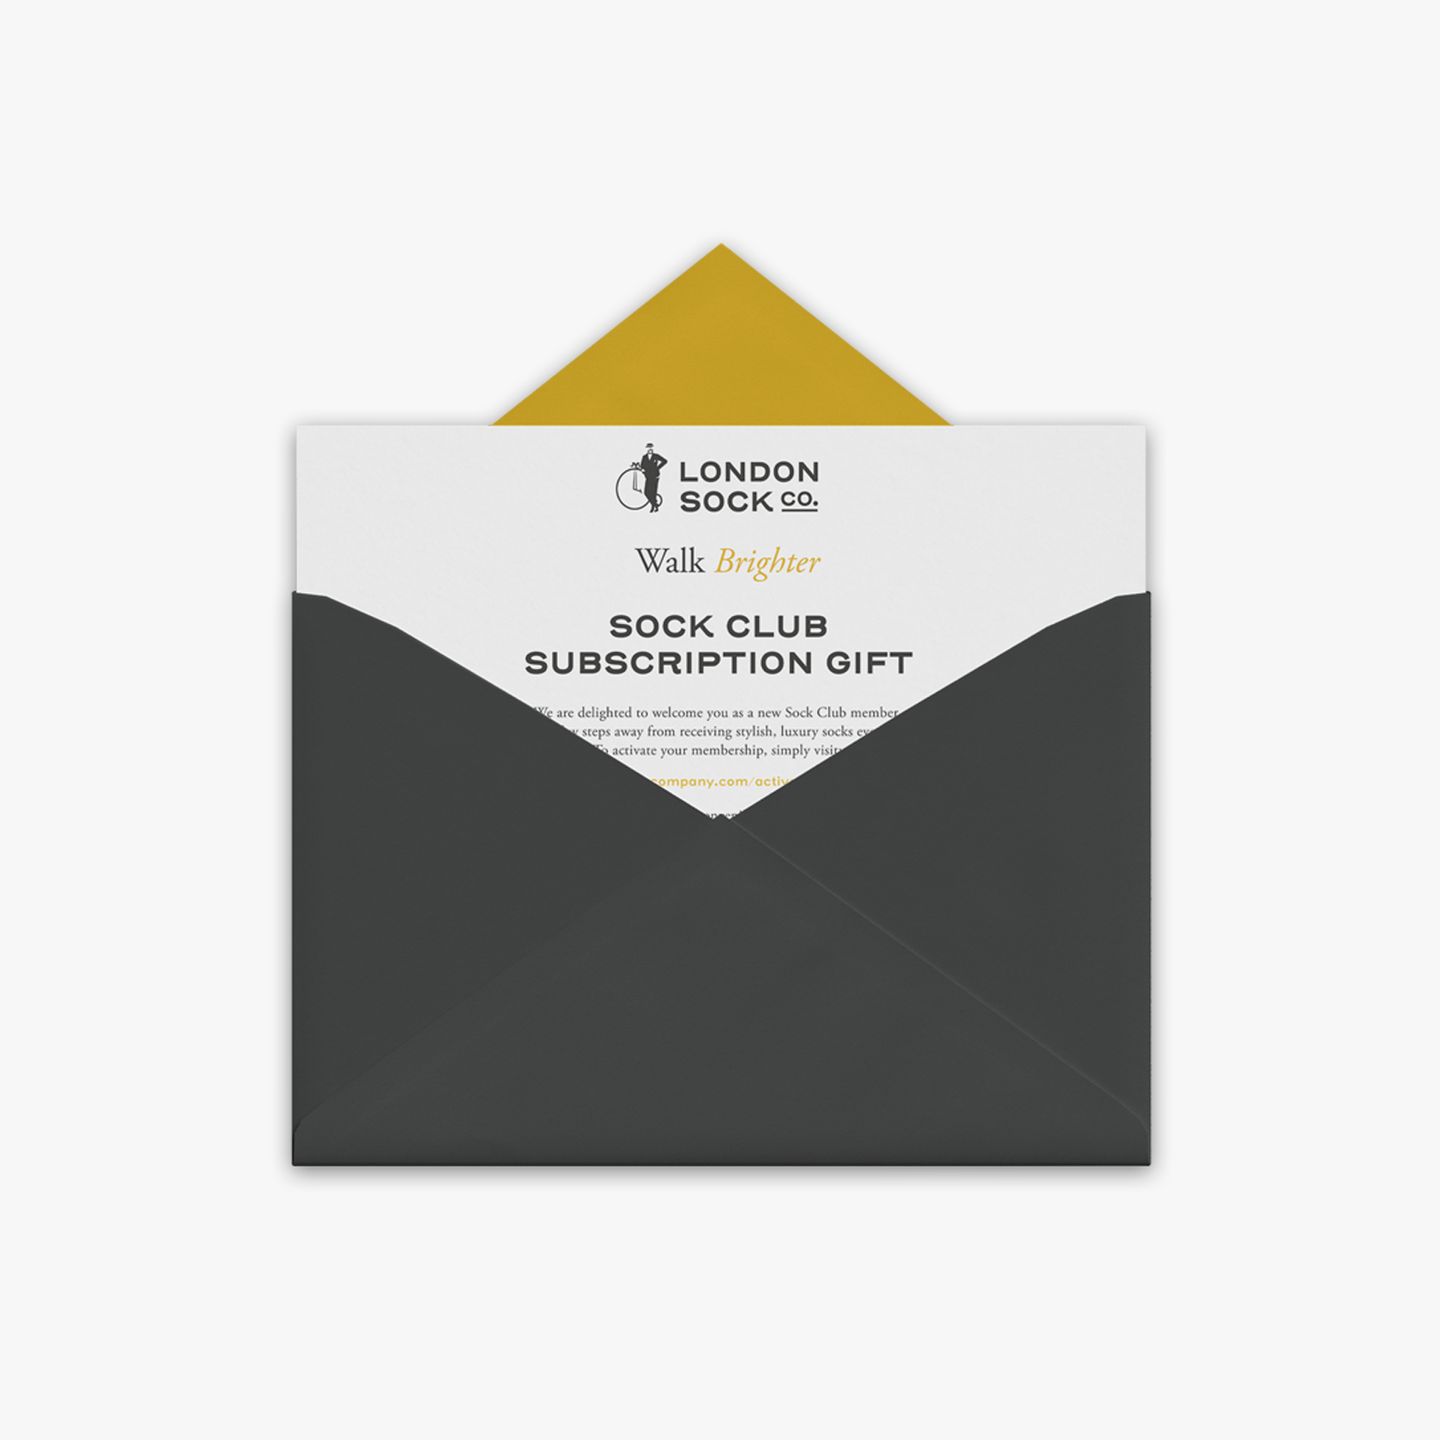 Envelope for LSC's sock club subscription gift card